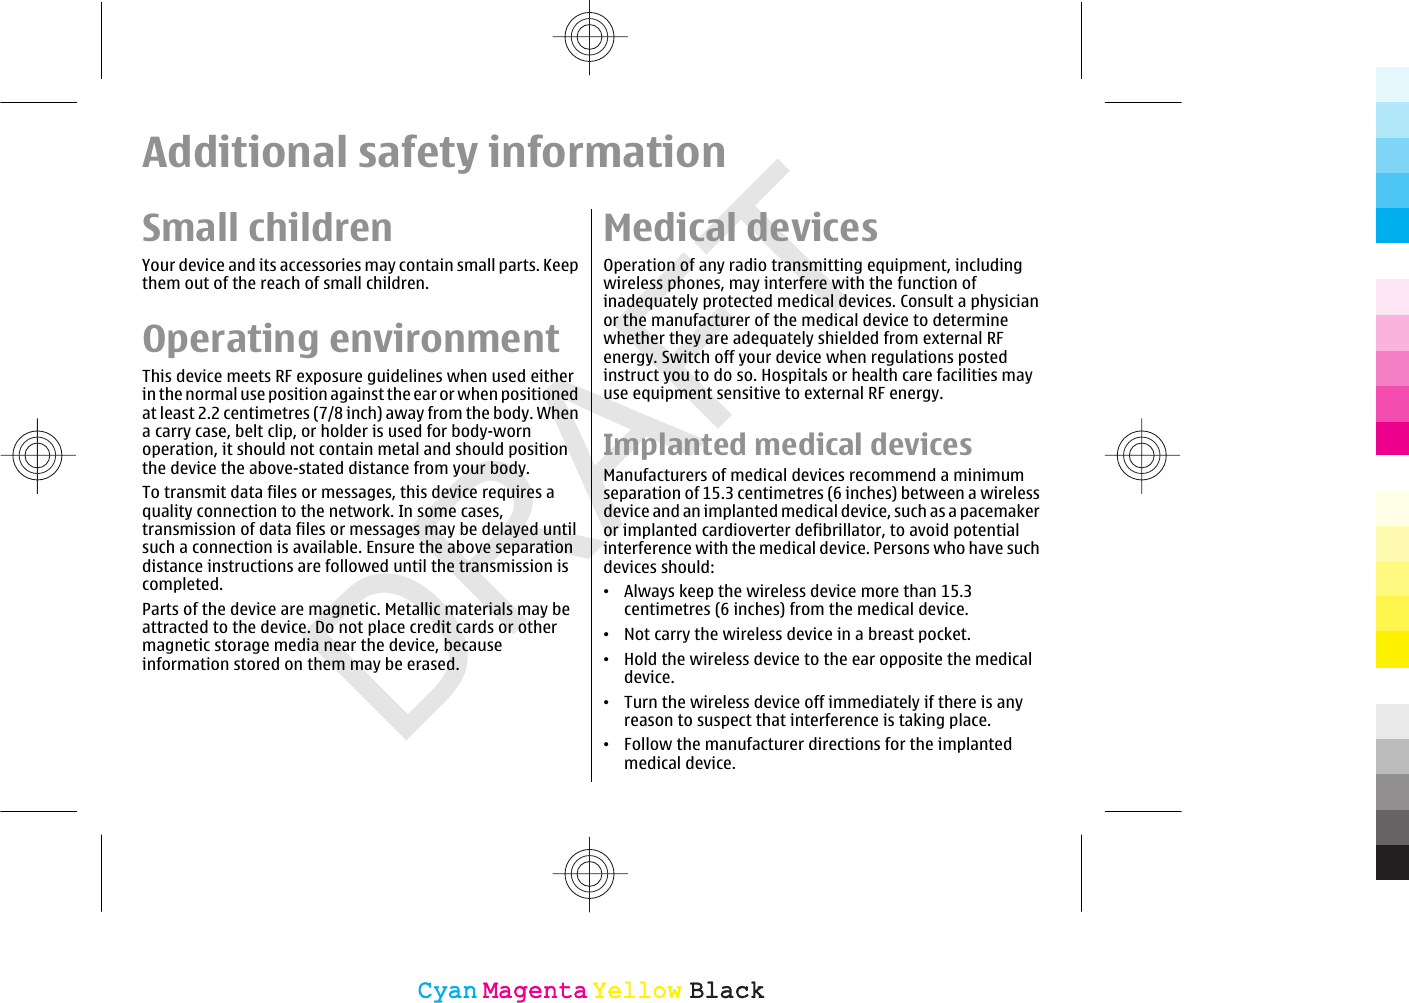 DRAFTAdditional safety informationSmall childrenYour device and its accessories may contain small parts. Keepthem out of the reach of small children.Operating environmentThis device meets RF exposure guidelines when used eitherin the normal use position against the ear or when positionedat least 2.2 centimetres (7/8 inch) away from the body. Whena carry case, belt clip, or holder is used for body-wornoperation, it should not contain metal and should positionthe device the above-stated distance from your body.To transmit data files or messages, this device requires aquality connection to the network. In some cases,transmission of data files or messages may be delayed untilsuch a connection is available. Ensure the above separationdistance instructions are followed until the transmission iscompleted.Parts of the device are magnetic. Metallic materials may beattracted to the device. Do not place credit cards or othermagnetic storage media near the device, becauseinformation stored on them may be erased.Medical devicesOperation of any radio transmitting equipment, includingwireless phones, may interfere with the function ofinadequately protected medical devices. Consult a physicianor the manufacturer of the medical device to determinewhether they are adequately shielded from external RFenergy. Switch off your device when regulations postedinstruct you to do so. Hospitals or health care facilities mayuse equipment sensitive to external RF energy.Implanted medical devicesManufacturers of medical devices recommend a minimumseparation of 15.3 centimetres (6 inches) between a wirelessdevice and an implanted medical device, such as a pacemakeror implanted cardioverter defibrillator, to avoid potentialinterference with the medical device. Persons who have suchdevices should:•Always keep the wireless device more than 15.3centimetres (6 inches) from the medical device.•Not carry the wireless device in a breast pocket.•Hold the wireless device to the ear opposite the medicaldevice.•Turn the wireless device off immediately if there is anyreason to suspect that interference is taking place.•Follow the manufacturer directions for the implantedmedical device.CyanCyanMagentaMagentaYellowYellowBlackBlack